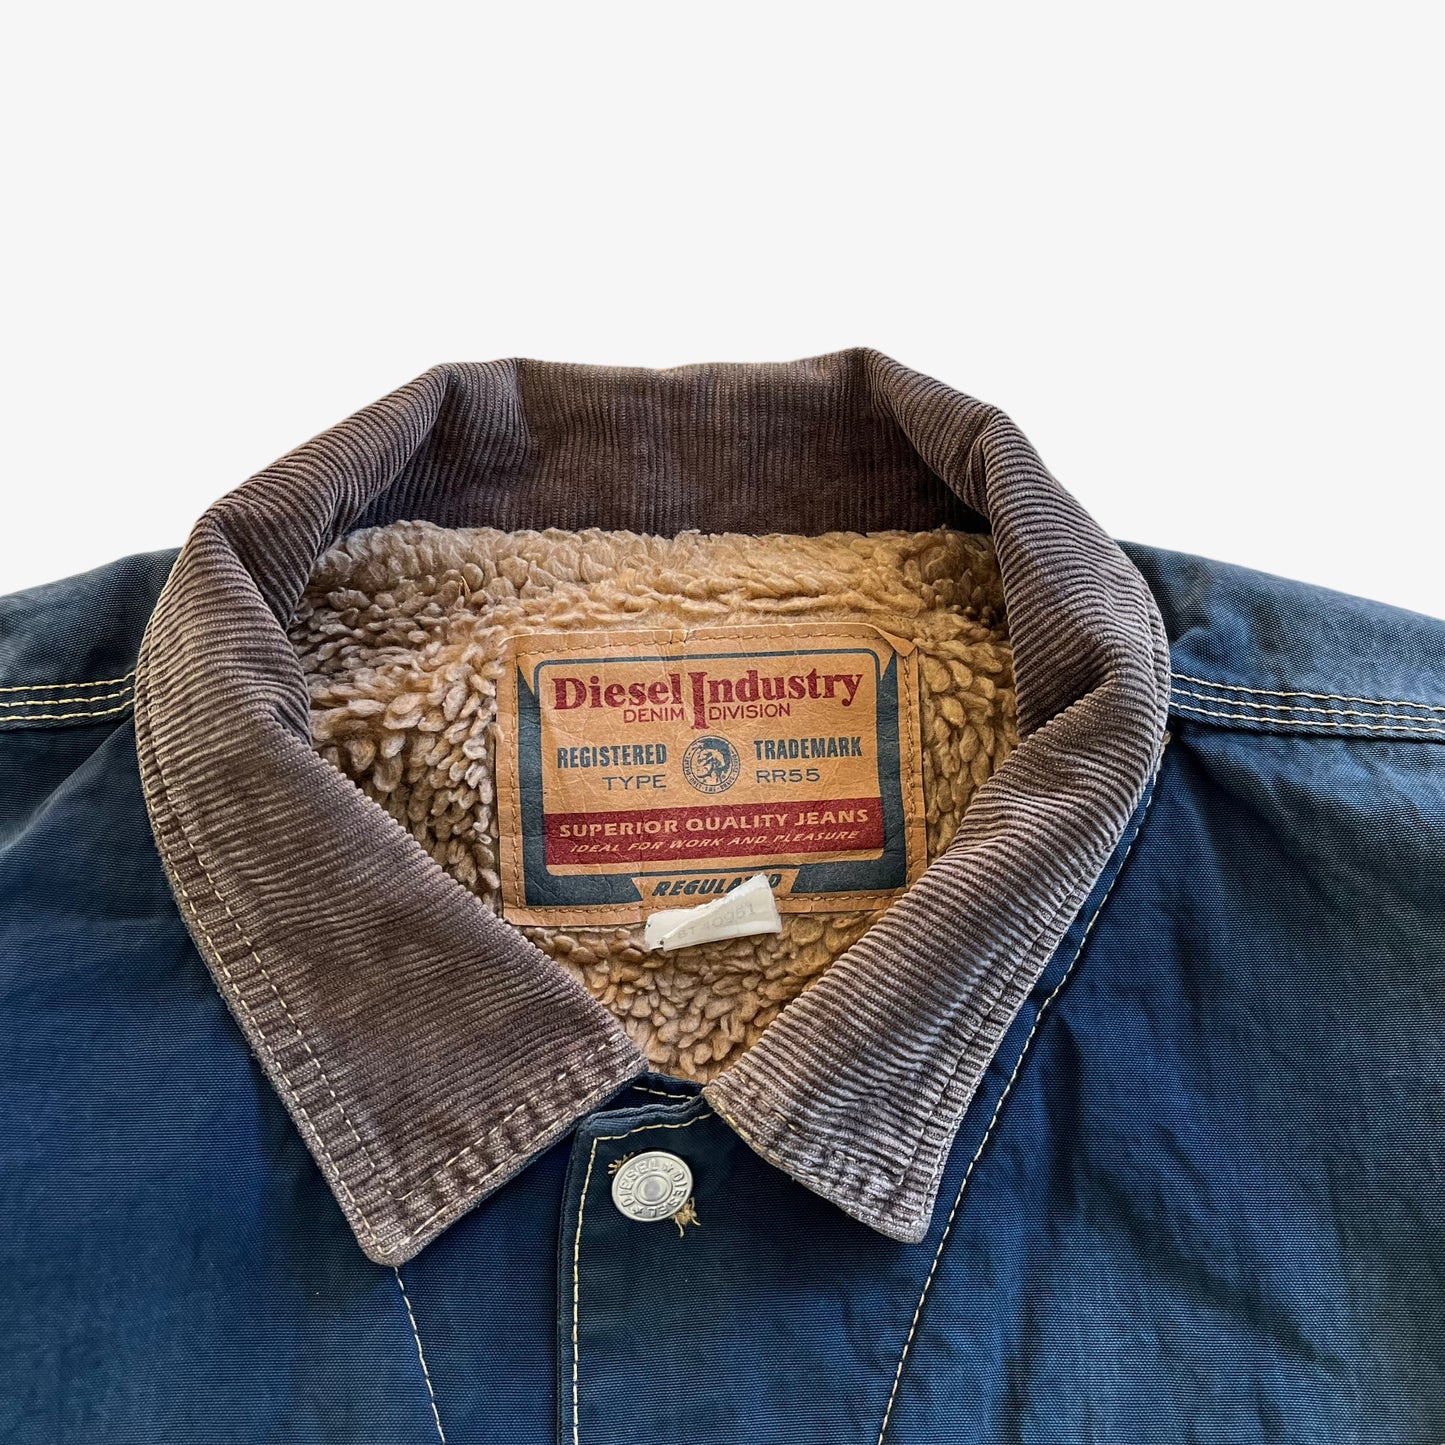 Vintage 90s Diesel Industry Trucker Jacket With Corduroy Collar And Sherpa Lining Label - Casspios Dream